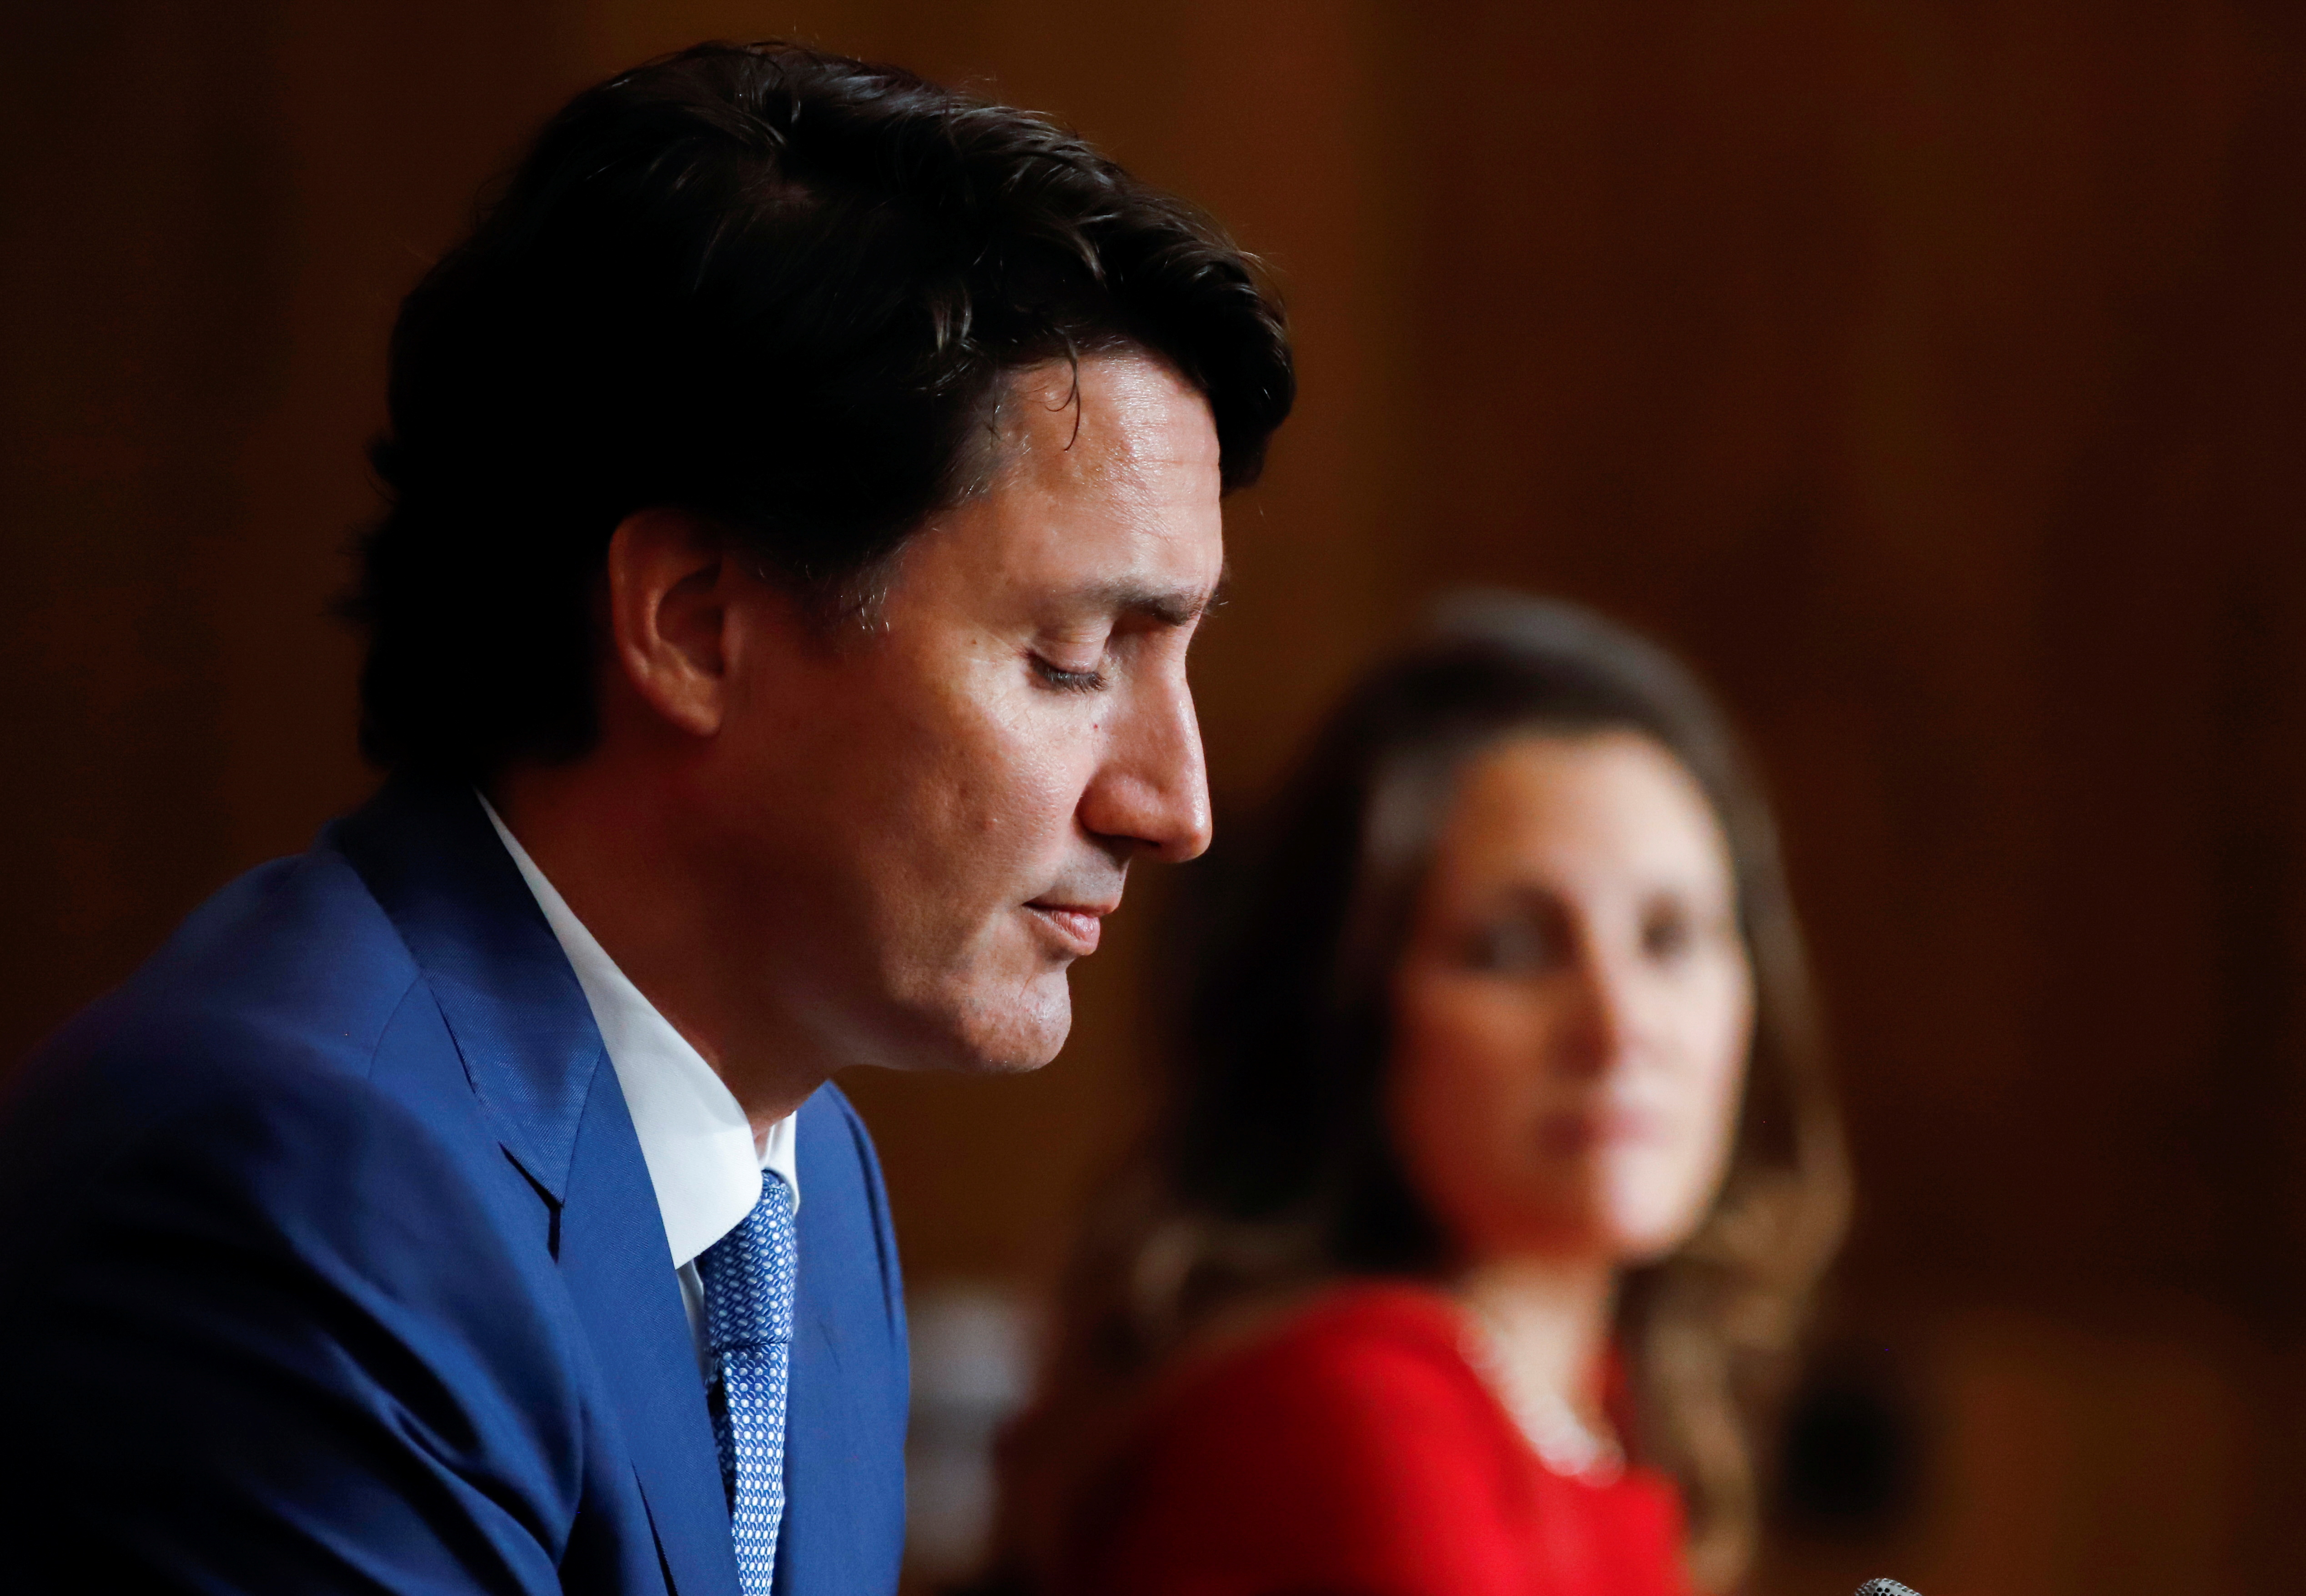 Prime Minister Trudeau expresses love for Canadiens on trade deadline day 